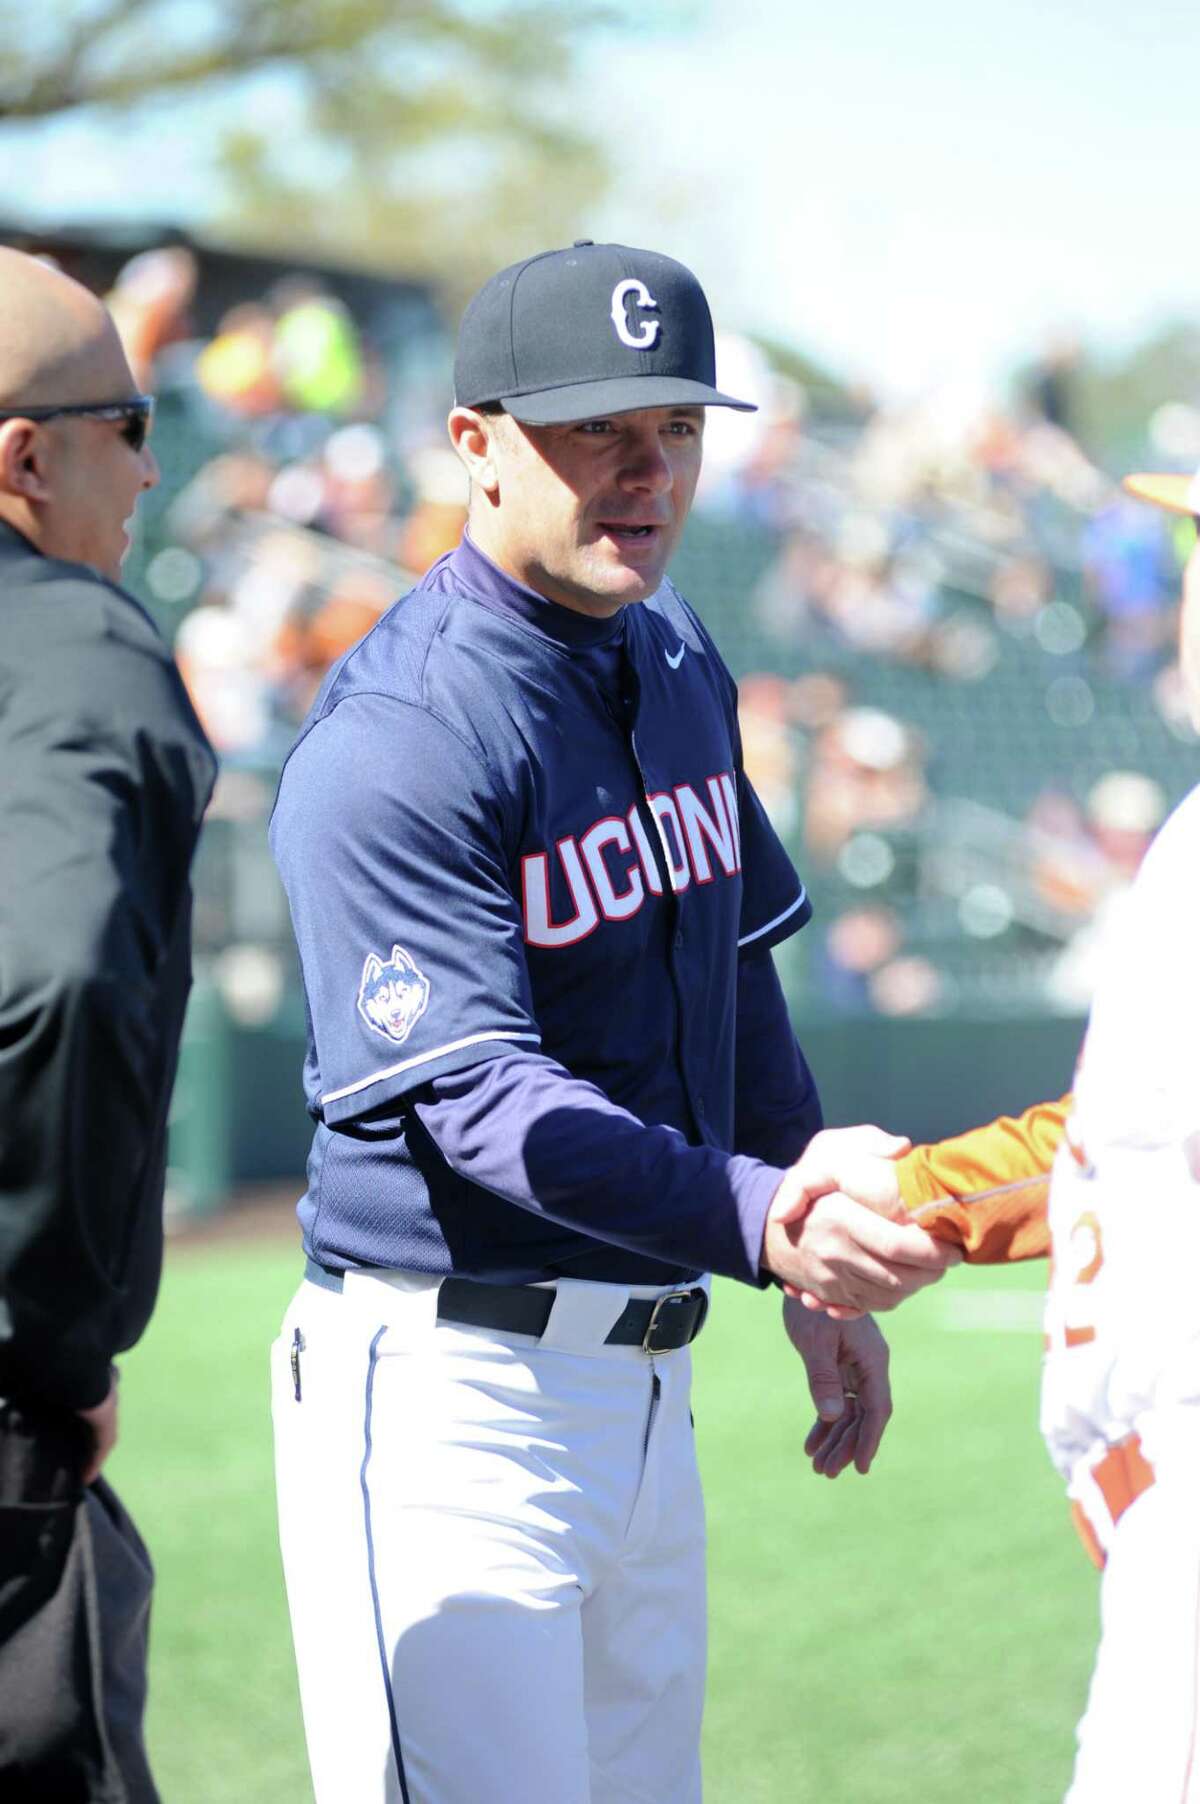 UConn baseball coach Jim Penders said he was happy about the NCAA’s decision to allow schools to provide spring-sport student-athletes an additional season of competition.